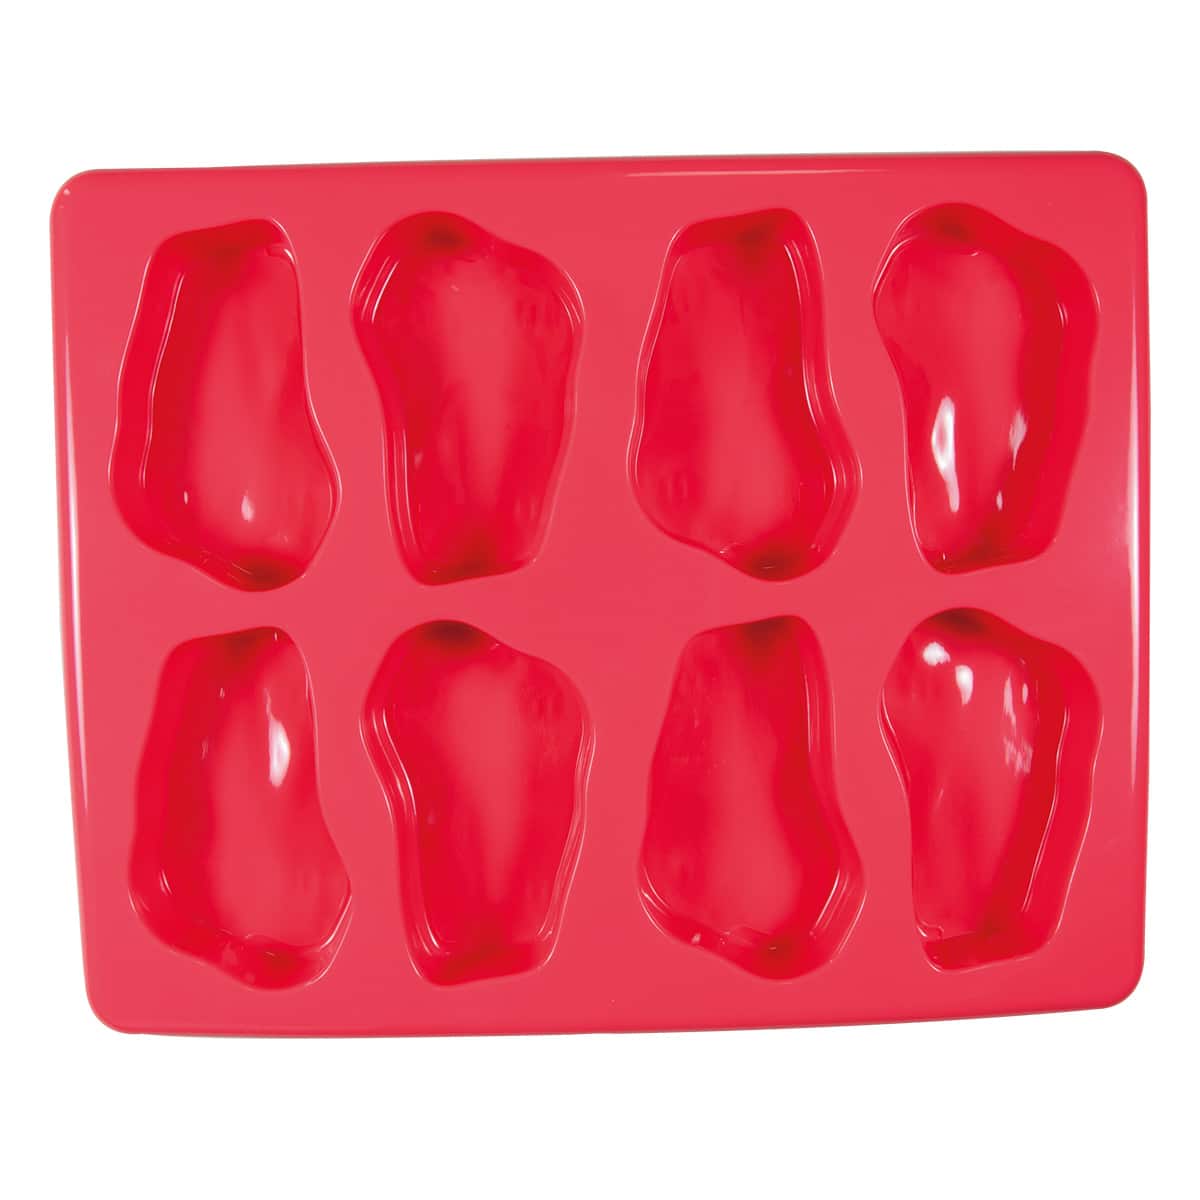 Flavour Creations Red Meat Mould (100ml)